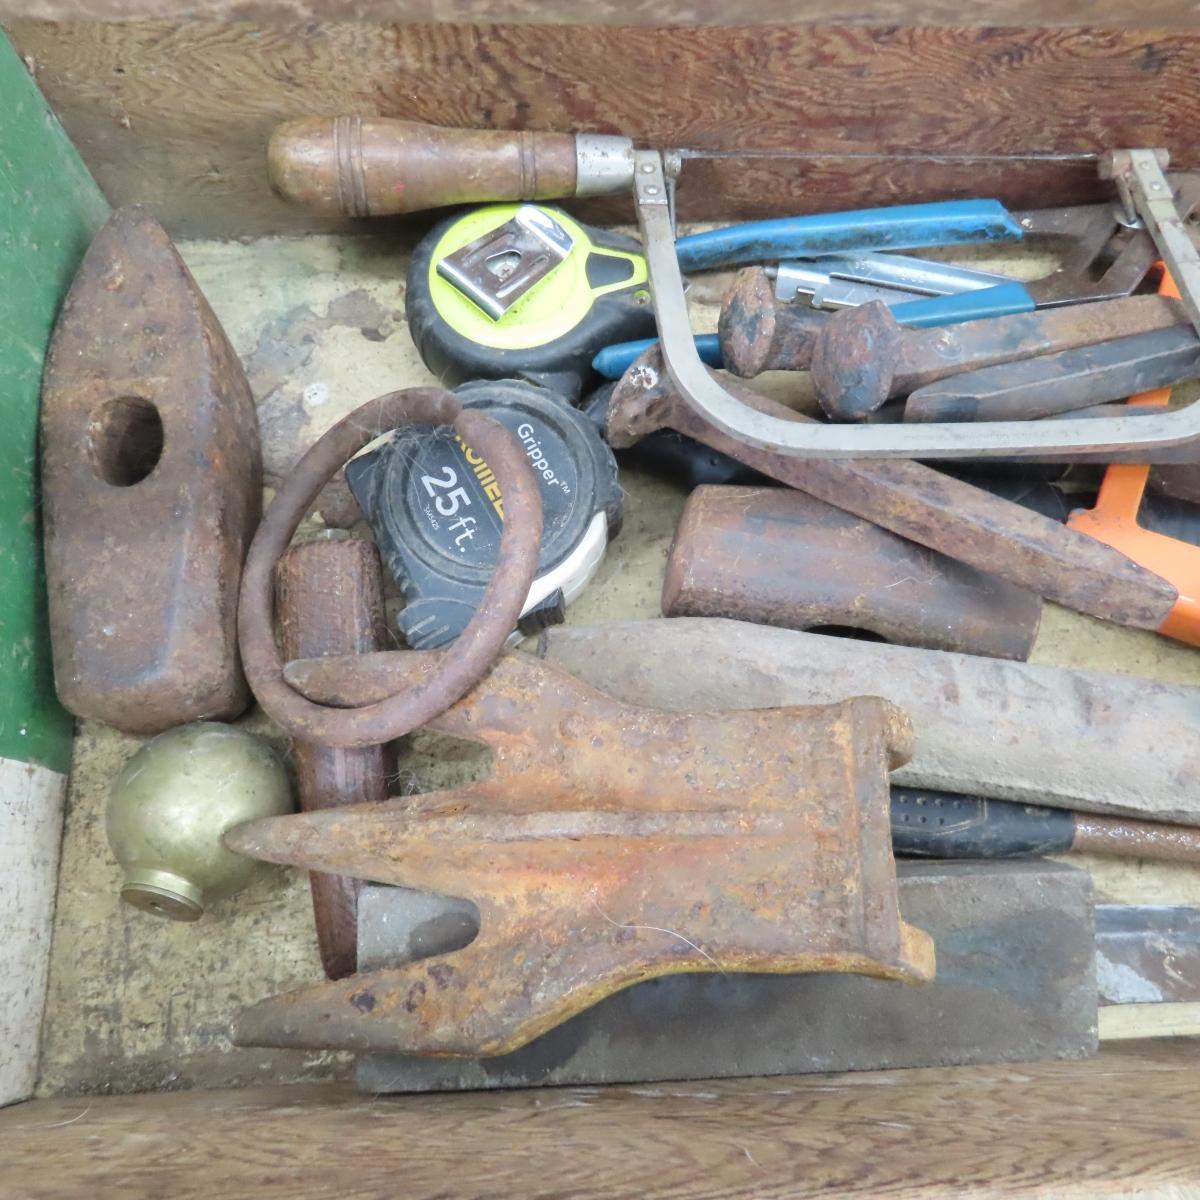 Shelf lot of tools and antique wood caddy